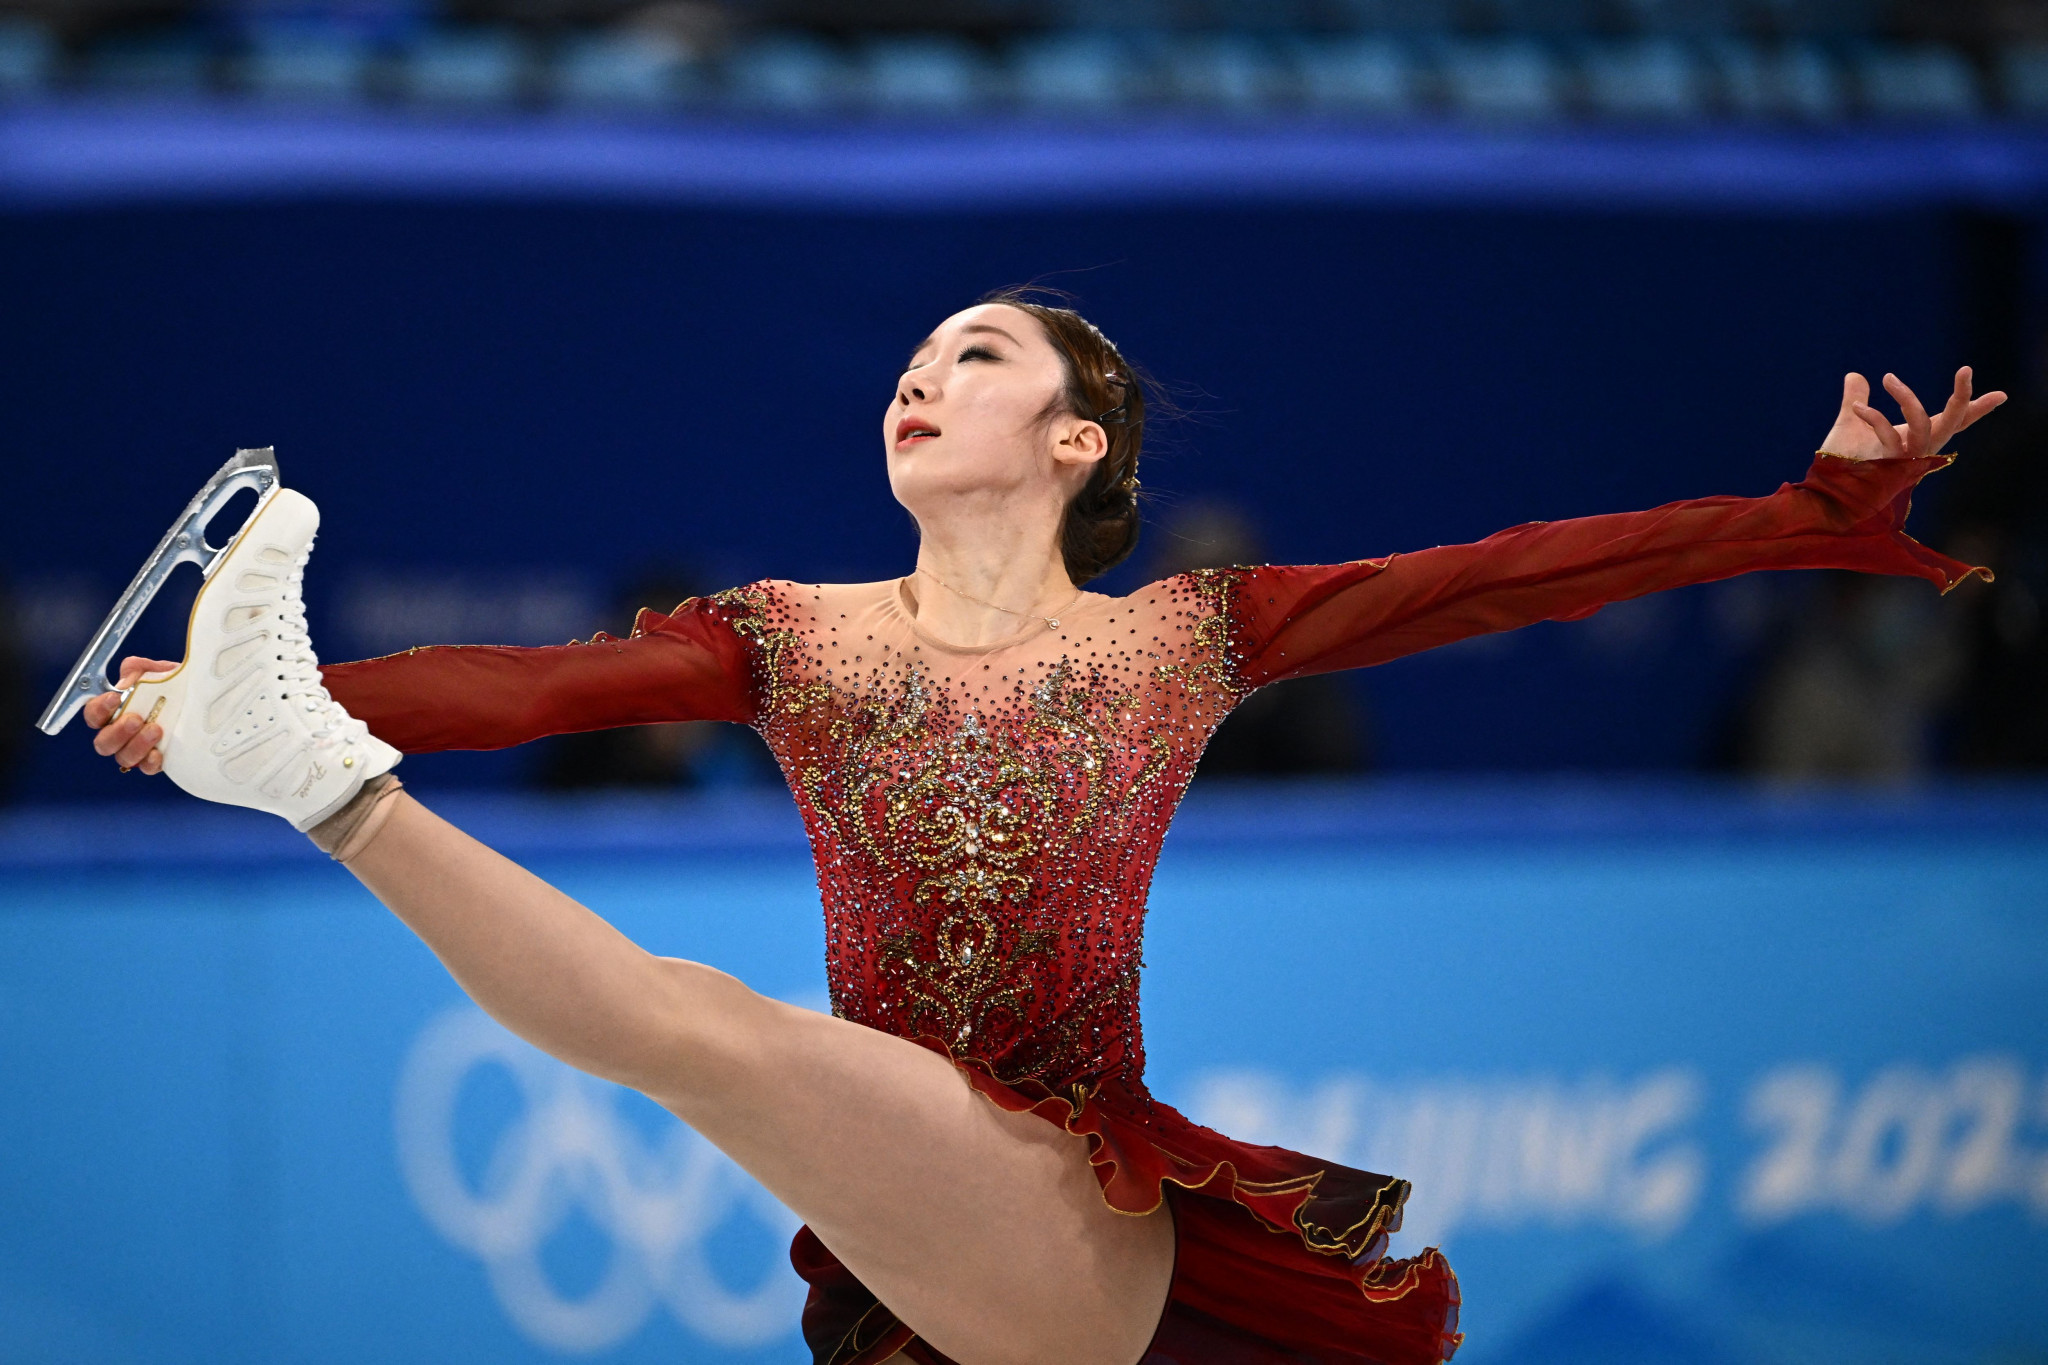 insidethegames is reporting LIVE from the Beijing 2022 Winter Olympic Games